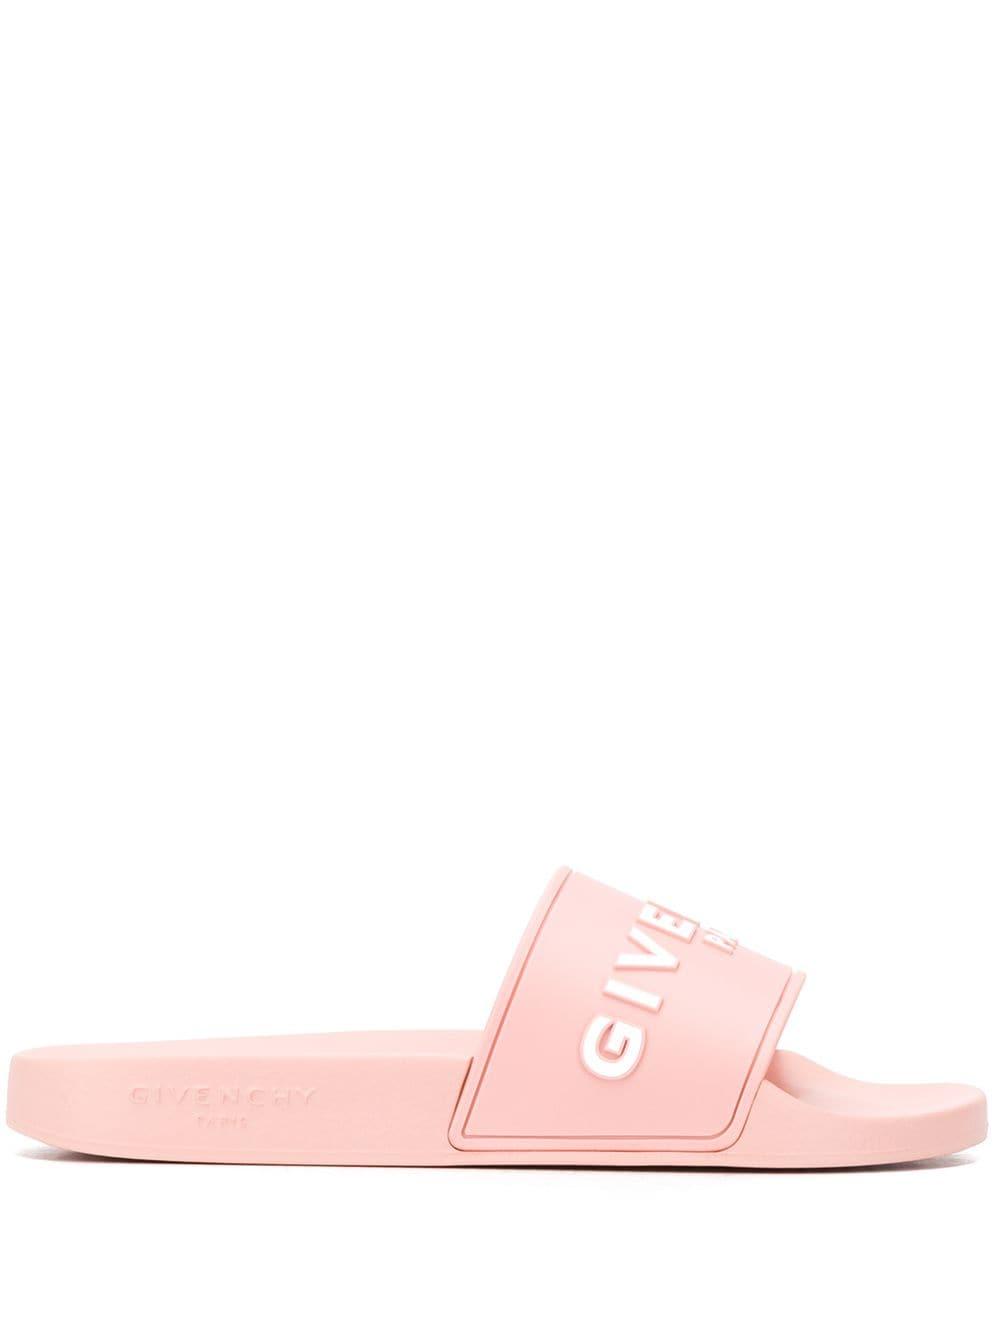 Givenchy Slide Flat Slippers in Nude (Pink) - Lyst